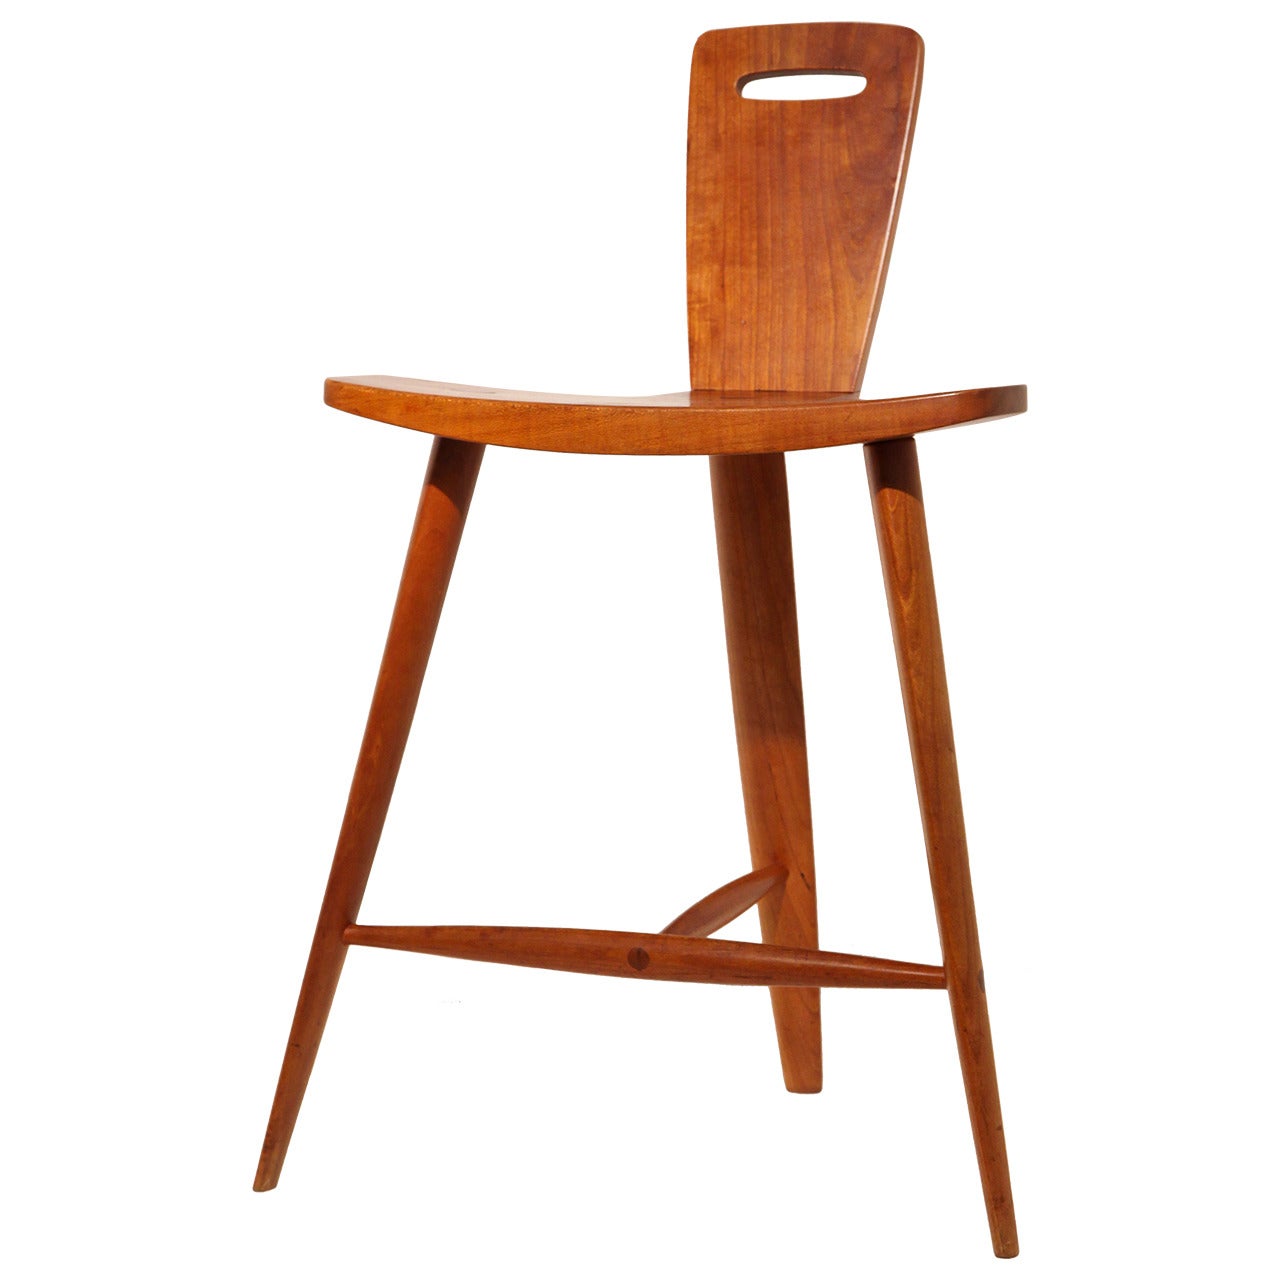 Extremely Rare Three-Legged Stool by Tage Frid For Sale